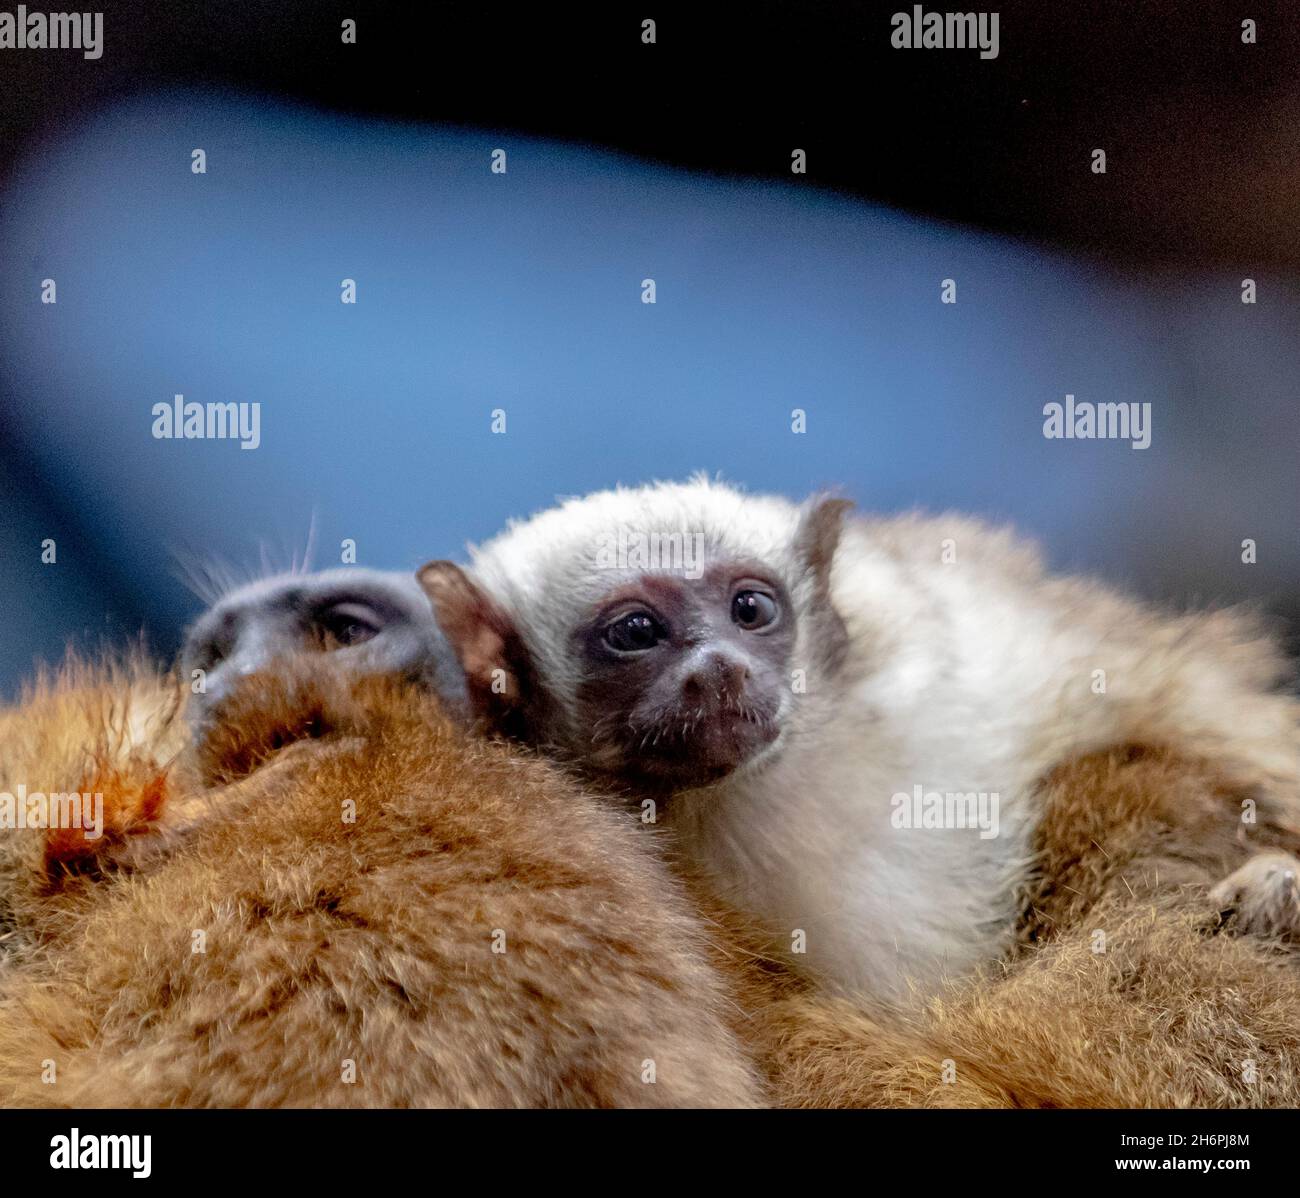 Gothenburg, Sweden, on Nov. 17, 2021, A pair of twin, Pied Tamarin (Saguinus bicolor) babies hold on to their parents' back for safety's sake at Universeum in Gothenburg, Sweden, on Nov. 17, 2021. The twins were born in September and were released into the rainforest area yesterday.  Photo by Adam Ihse / TT / Code 9200 Stock Photo